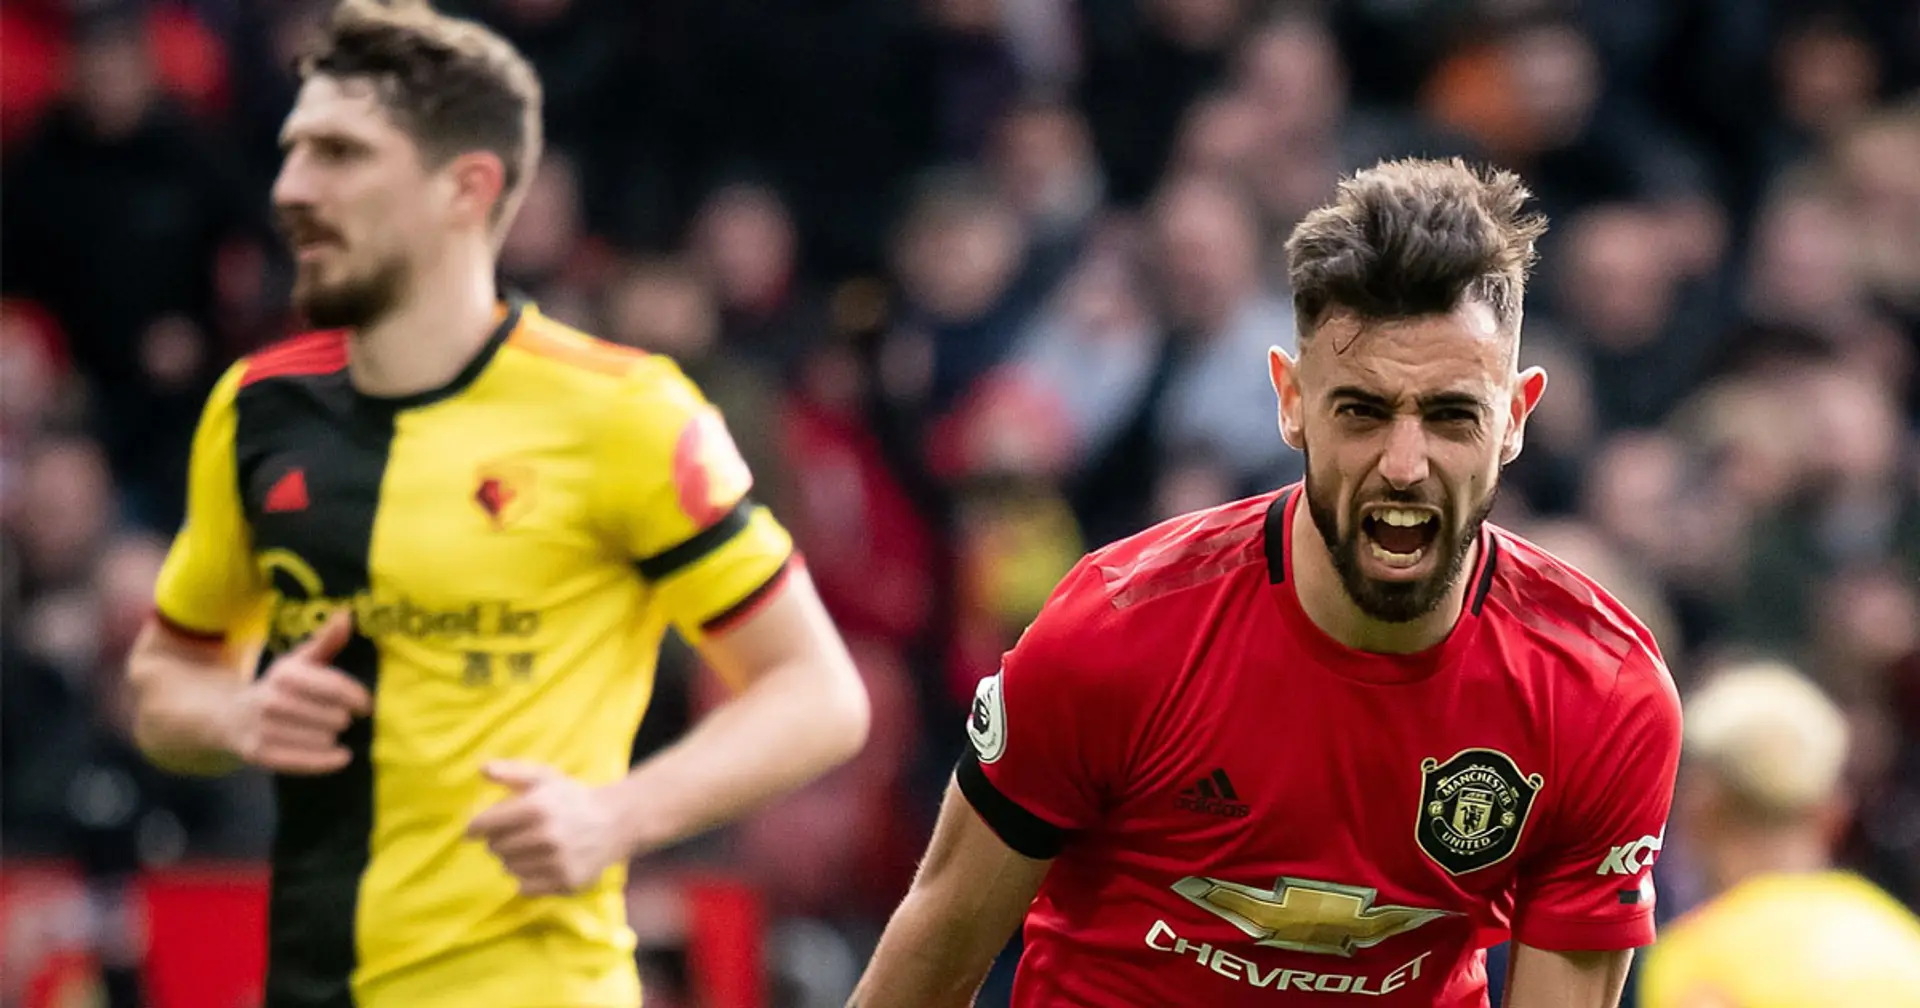 ‘We were all very impressed’: Watford defender Craig Cathcart gives glowing review of what it’s like facing Bruno Fernandes